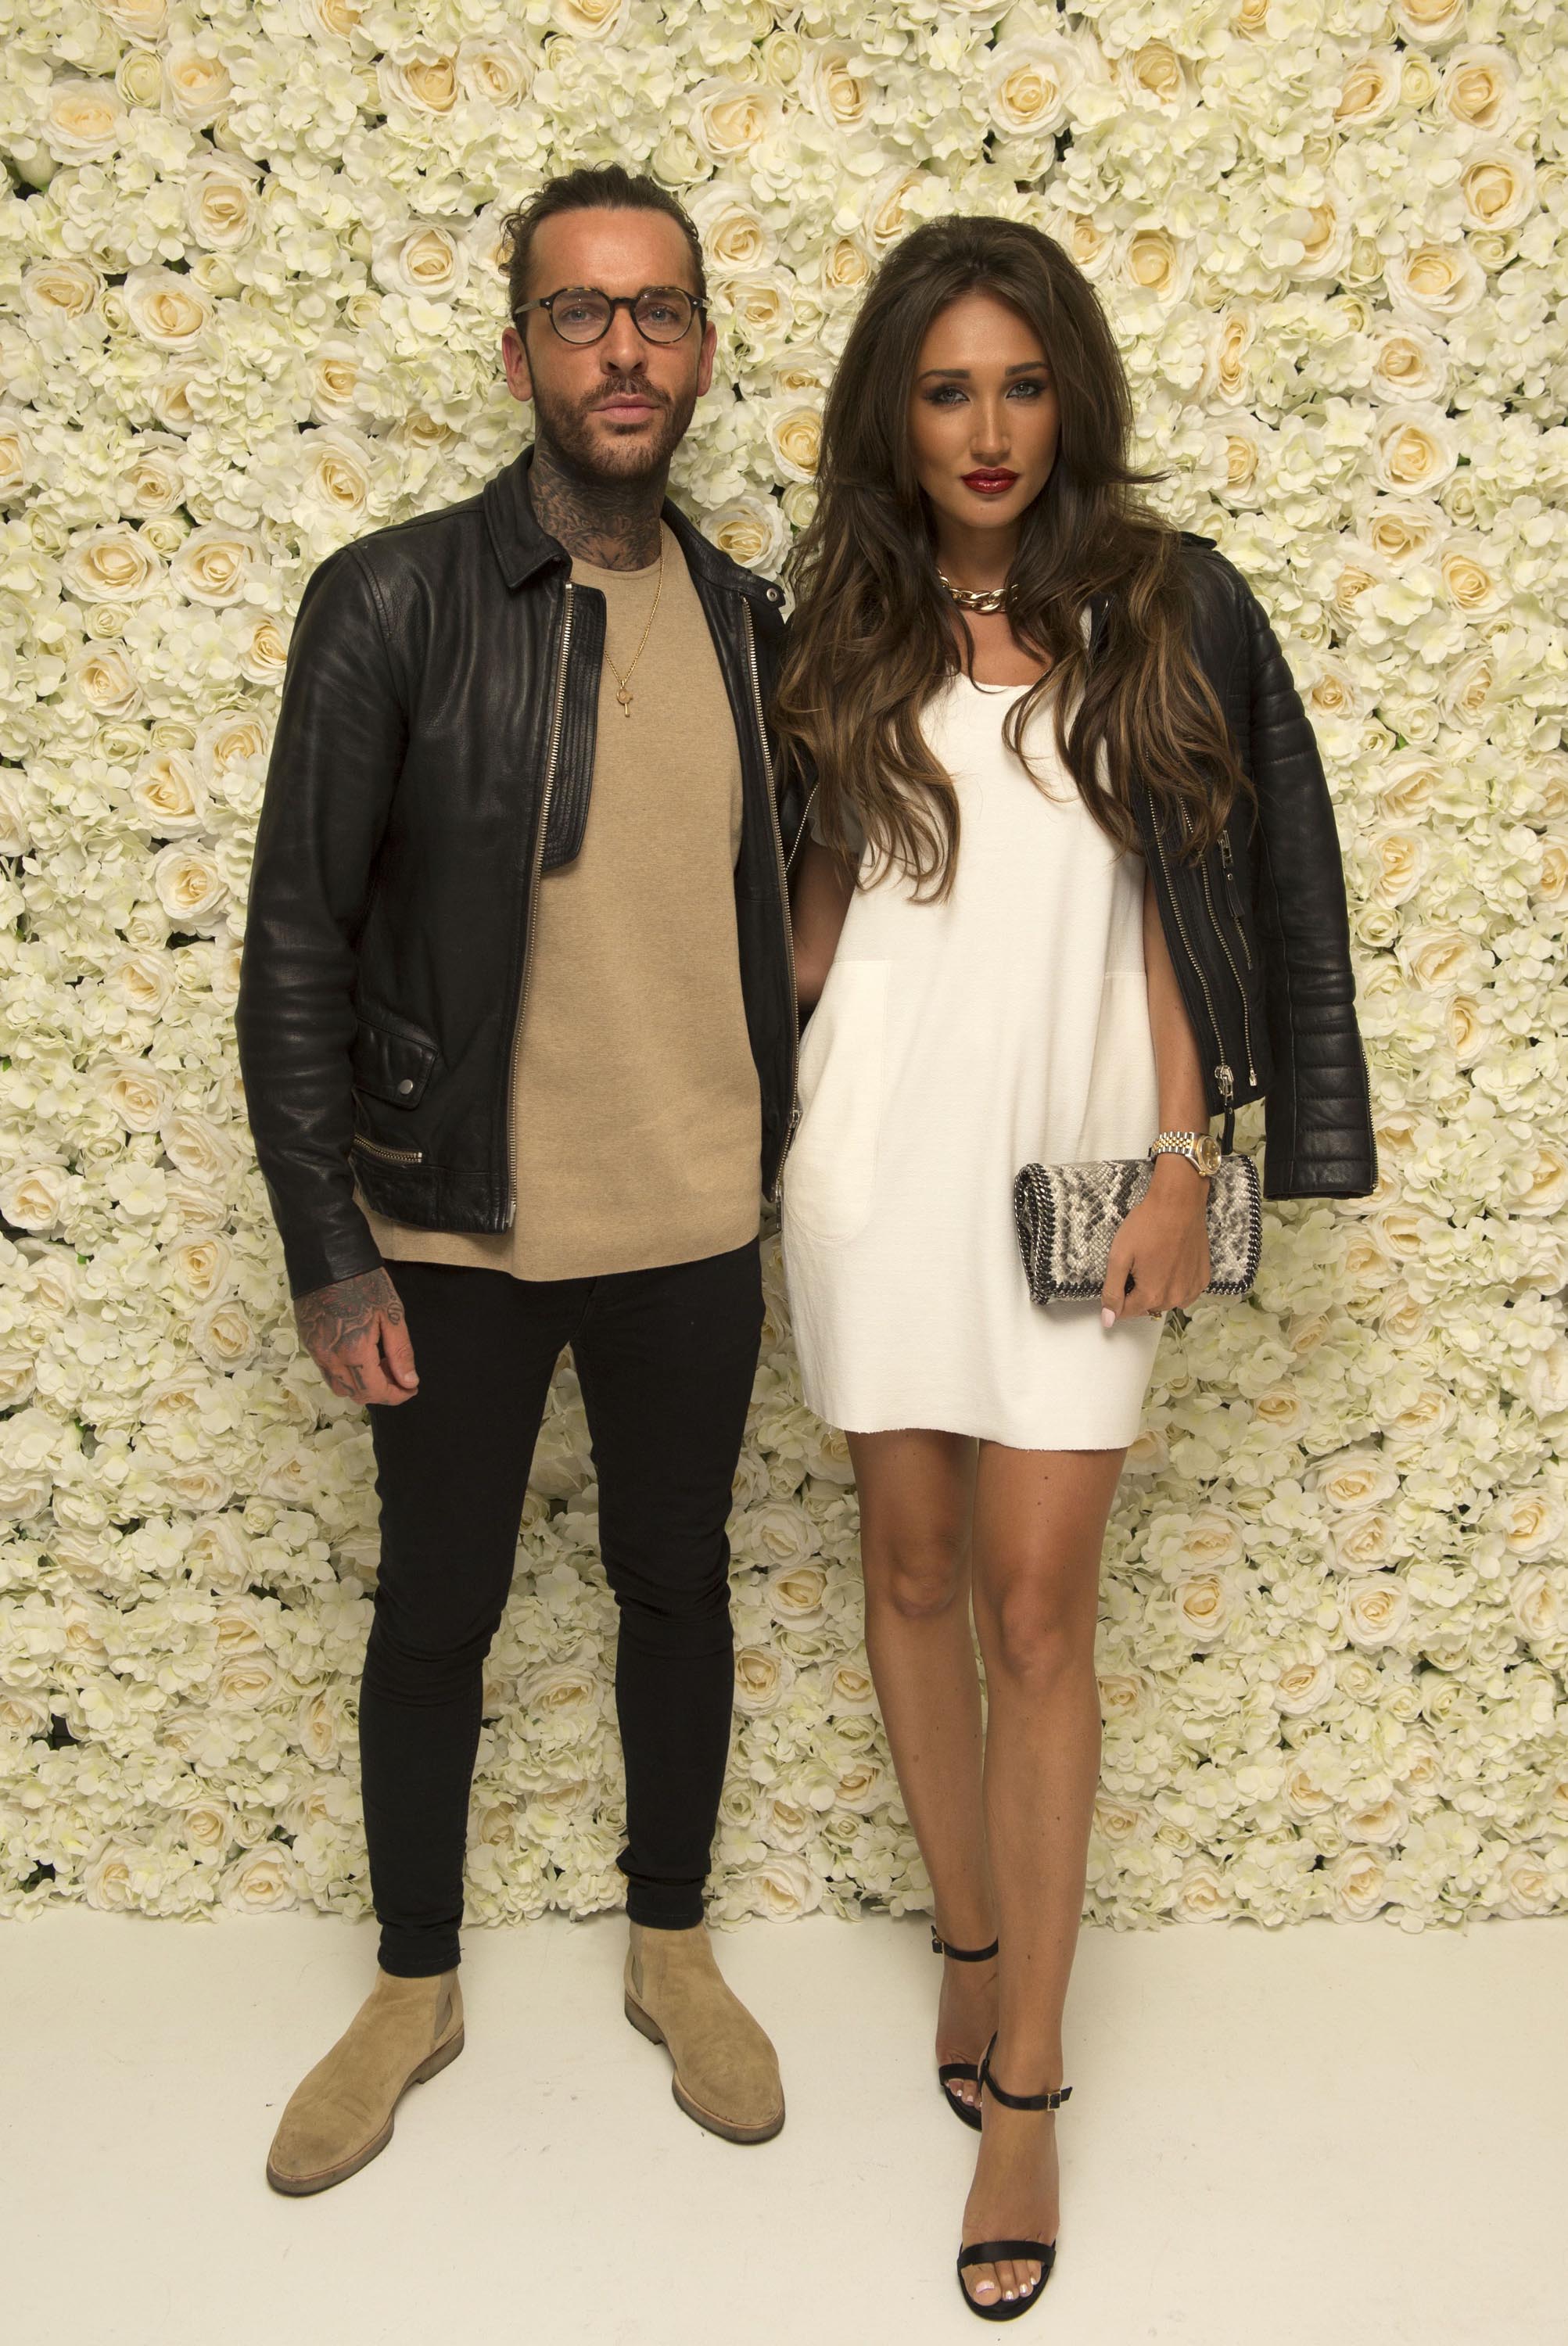 Megan Mckenna attends Jess Wright Footwear Collection Launch